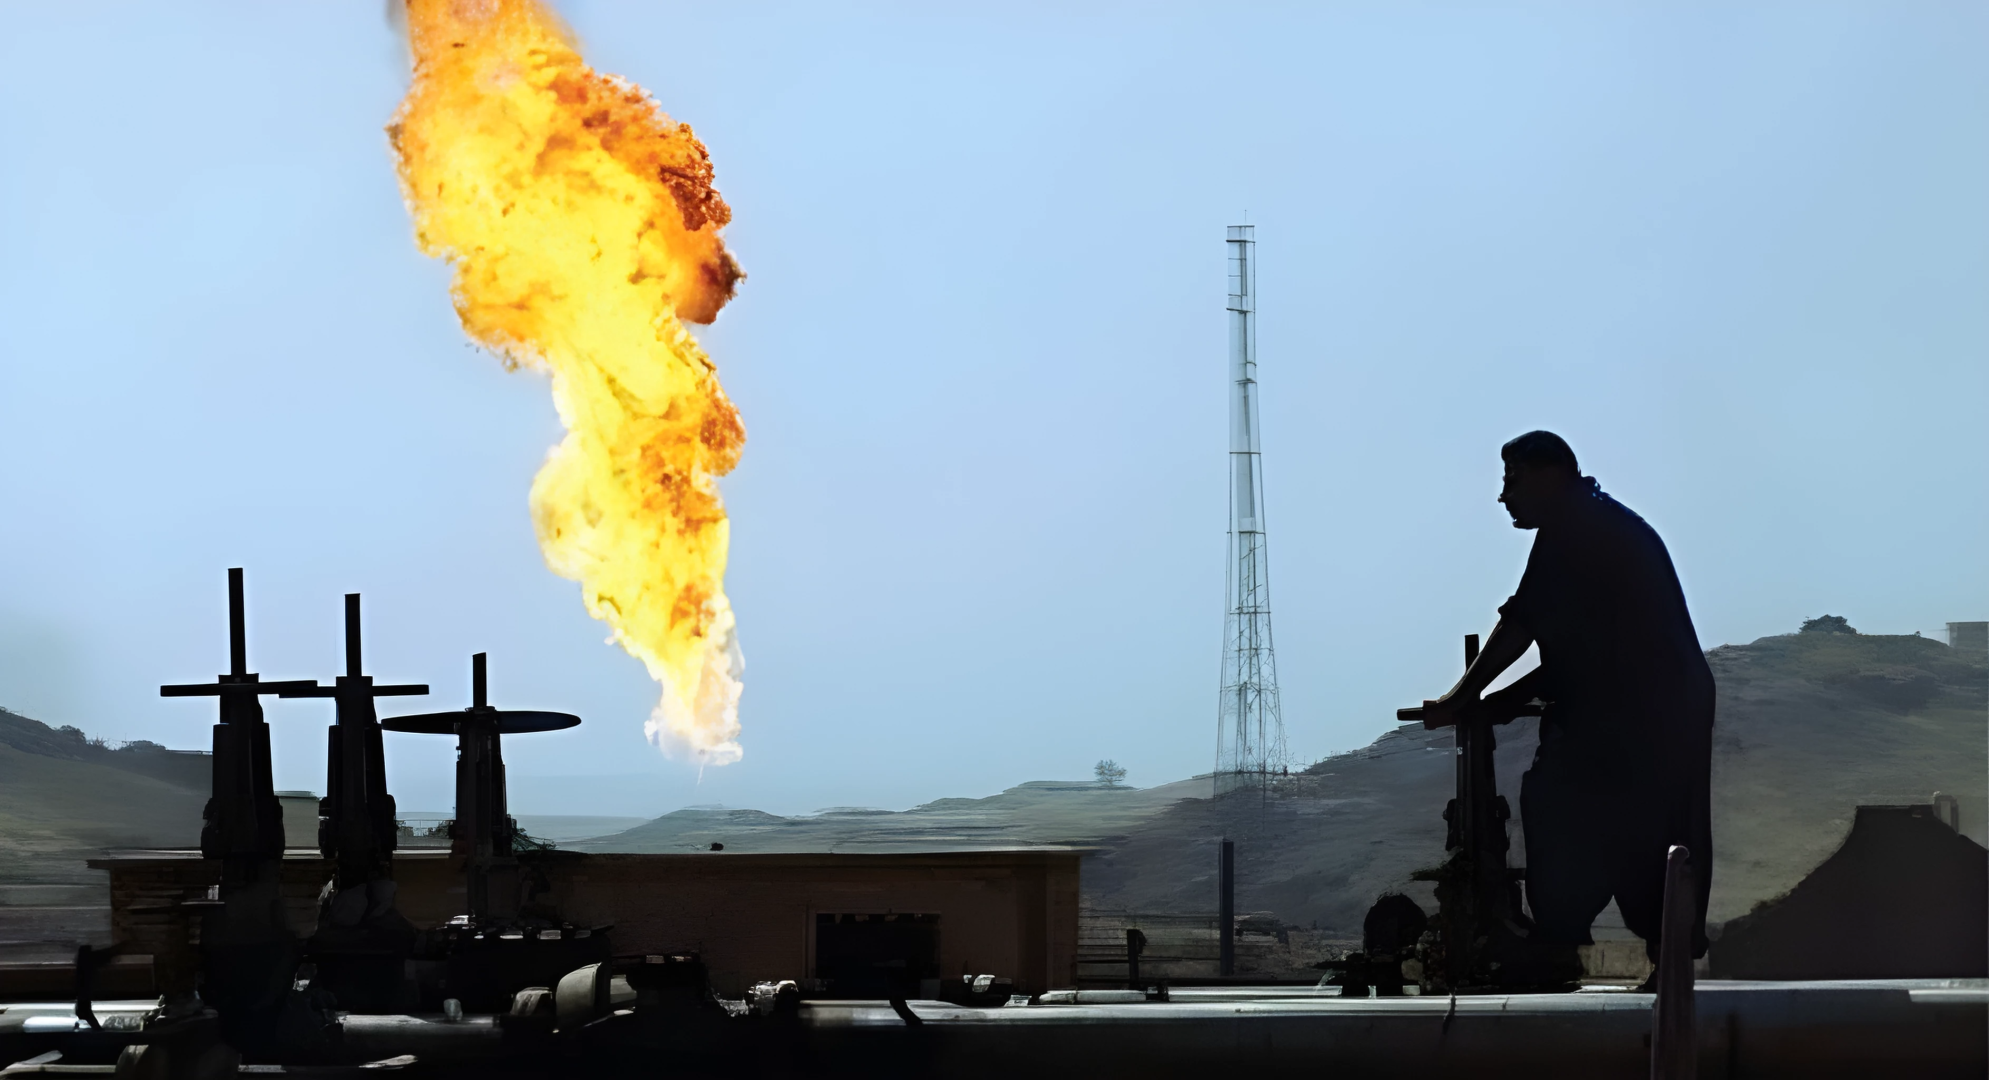 Budget law contributes to Kurdistan's oil exports halt, says KRG as Baghdad, IOCs trade blame